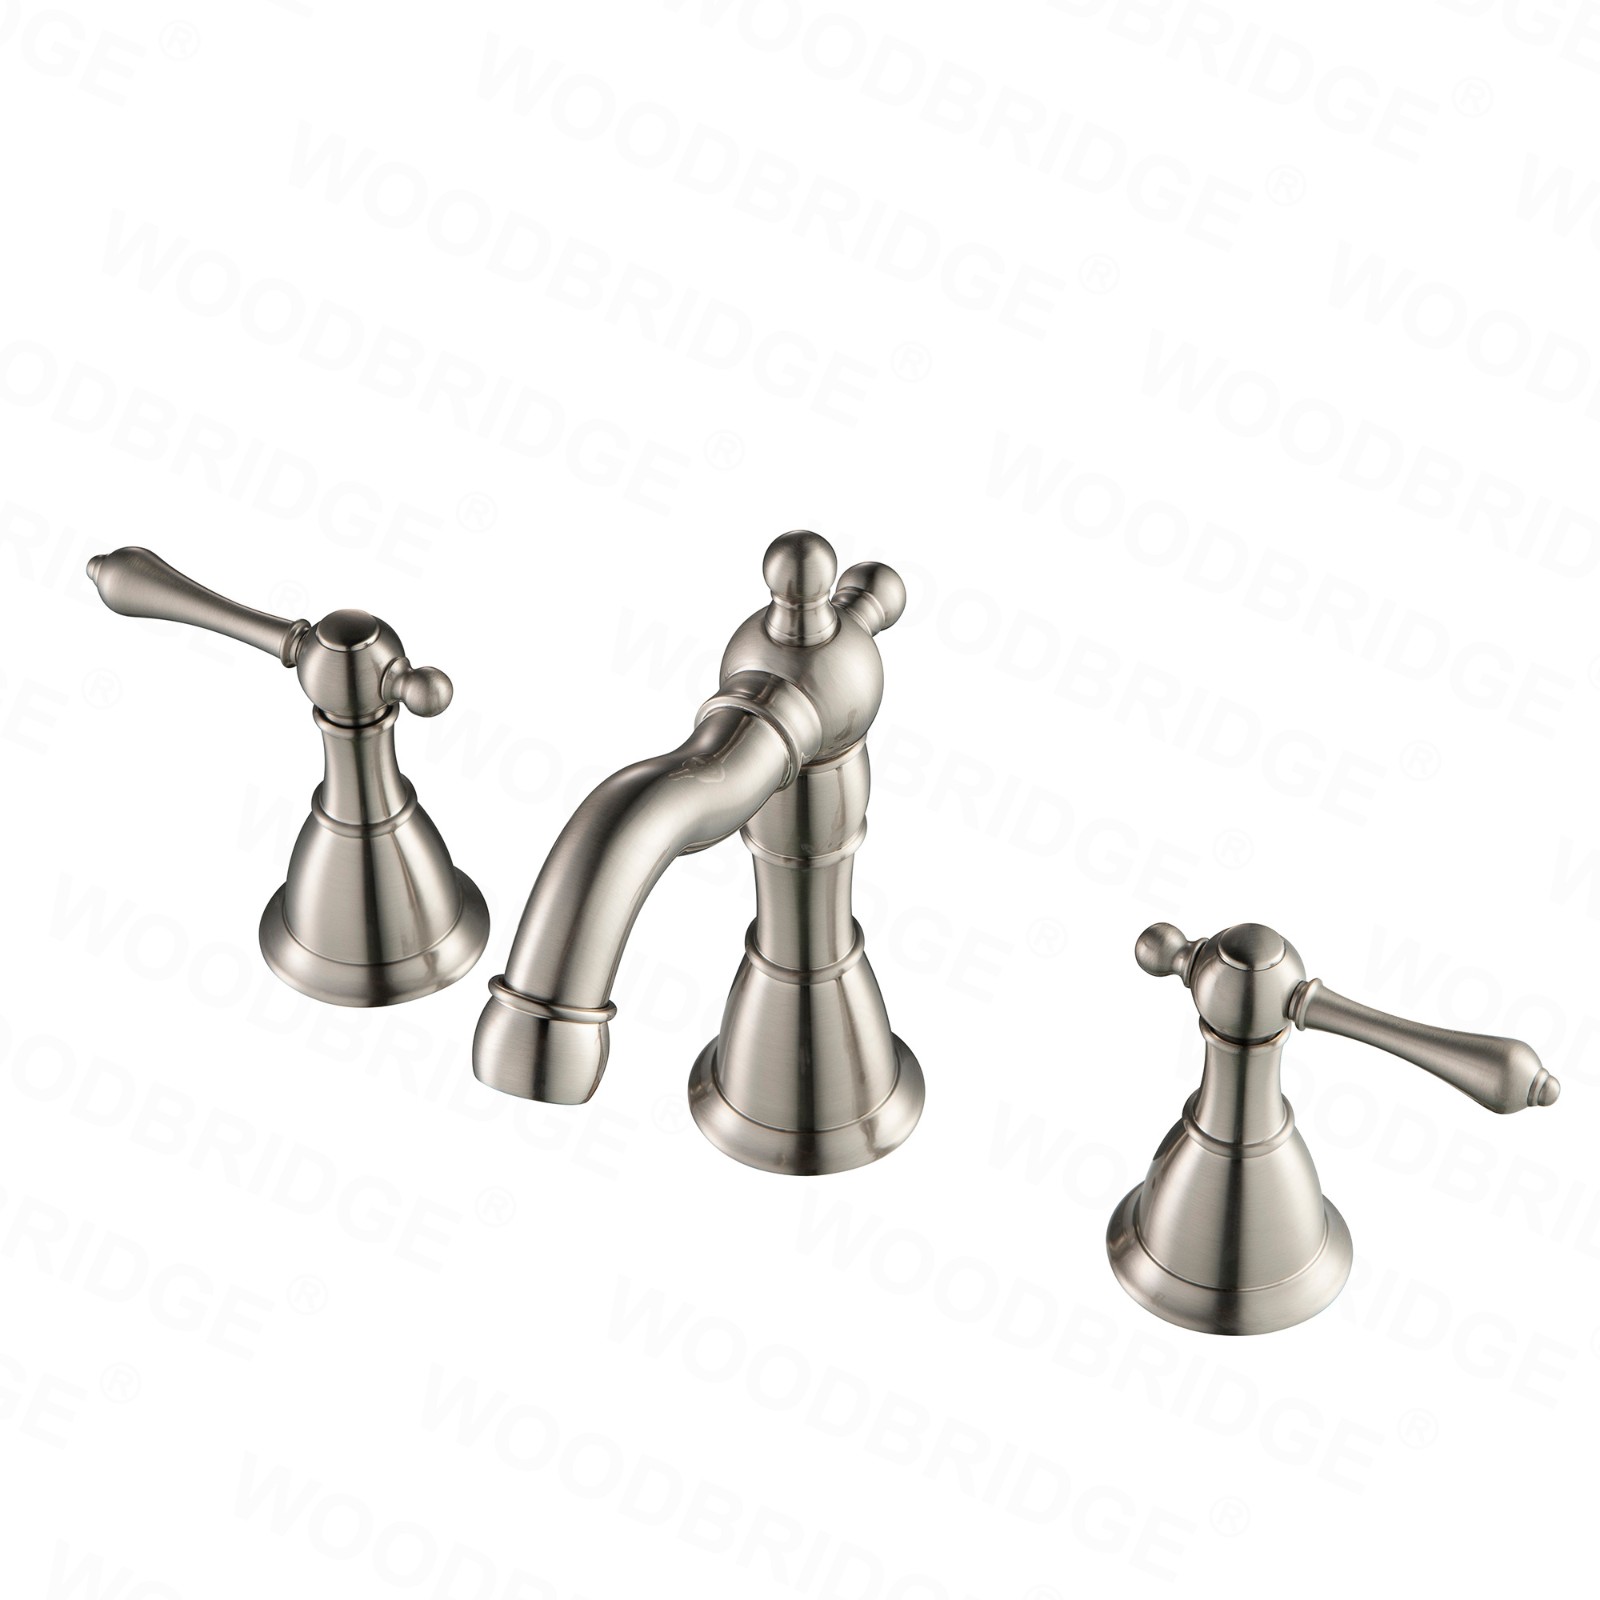  WOODBRIDGE WB802005BN 8-inch 3-hole Widespread Lavatory Faucet with Two Metal Lever Handle, Brushed Nickel_6338